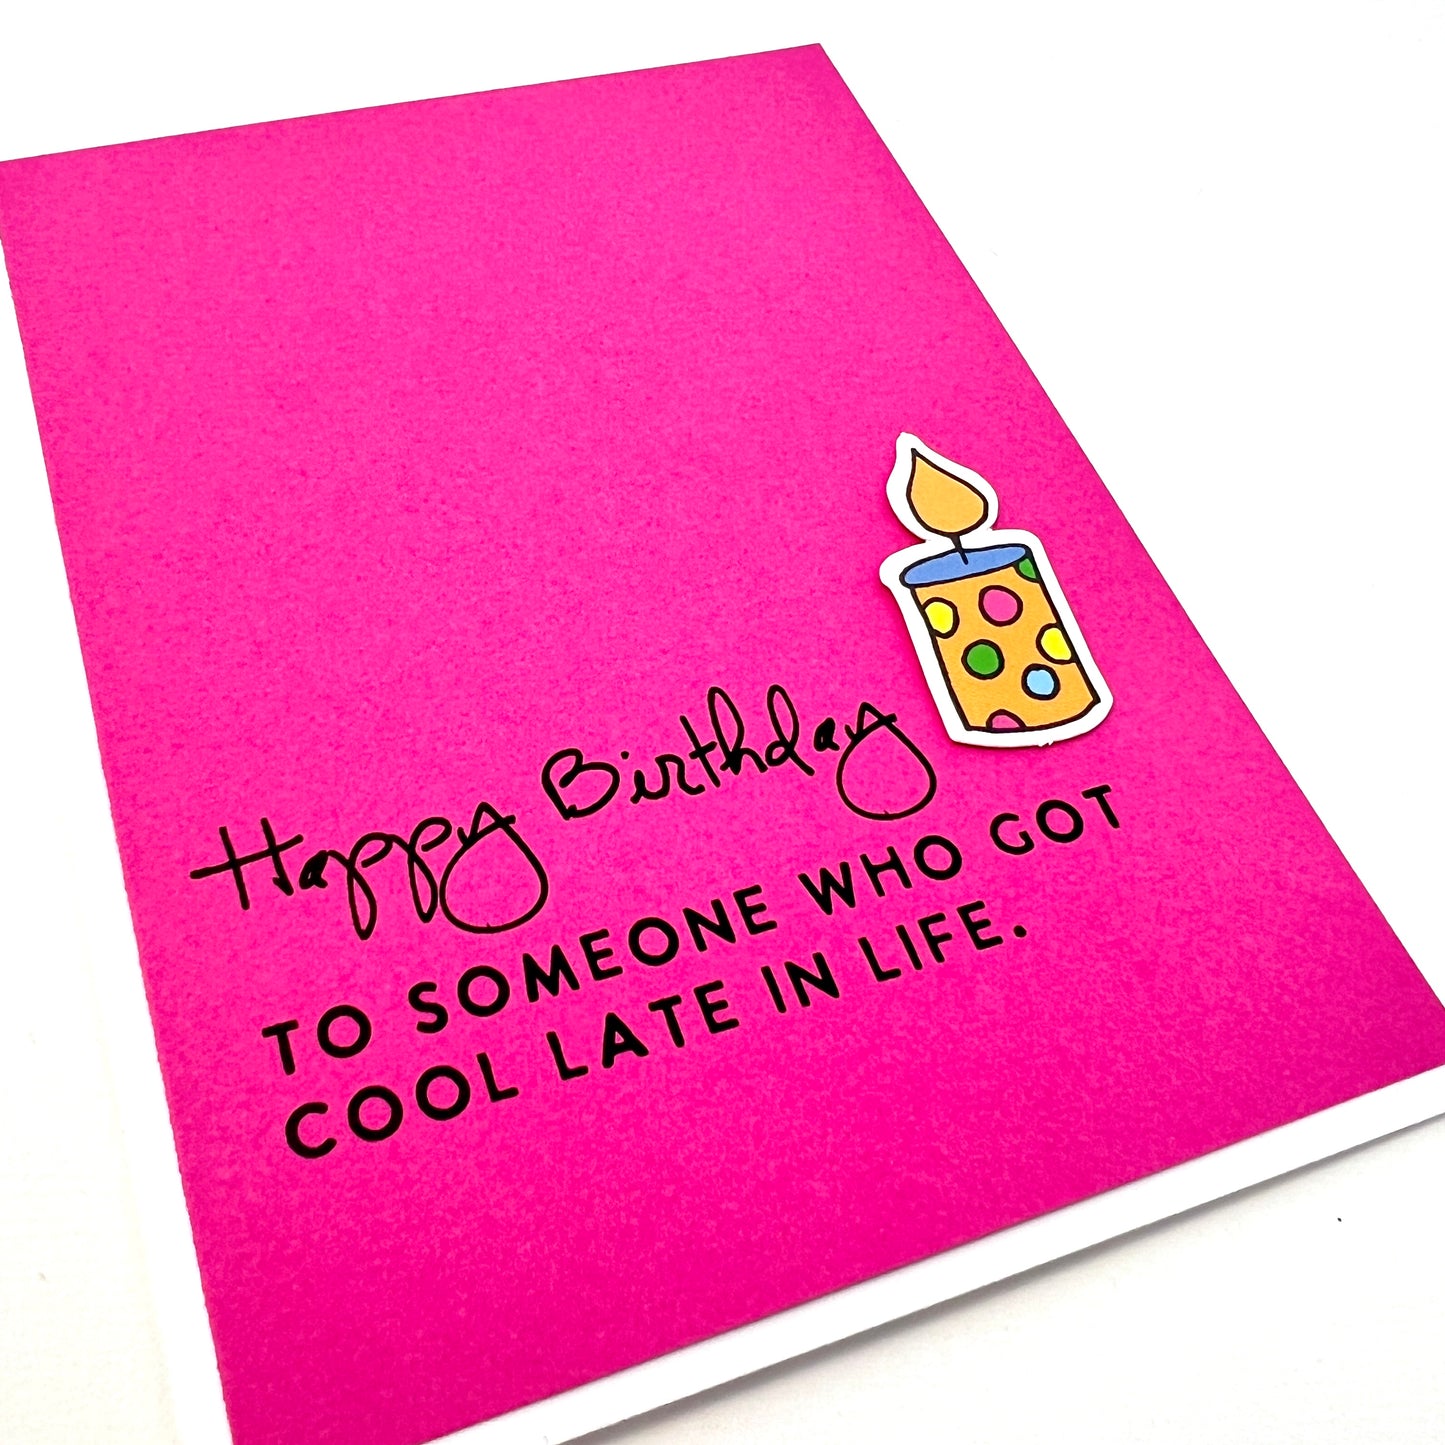 Cool Late in Life card